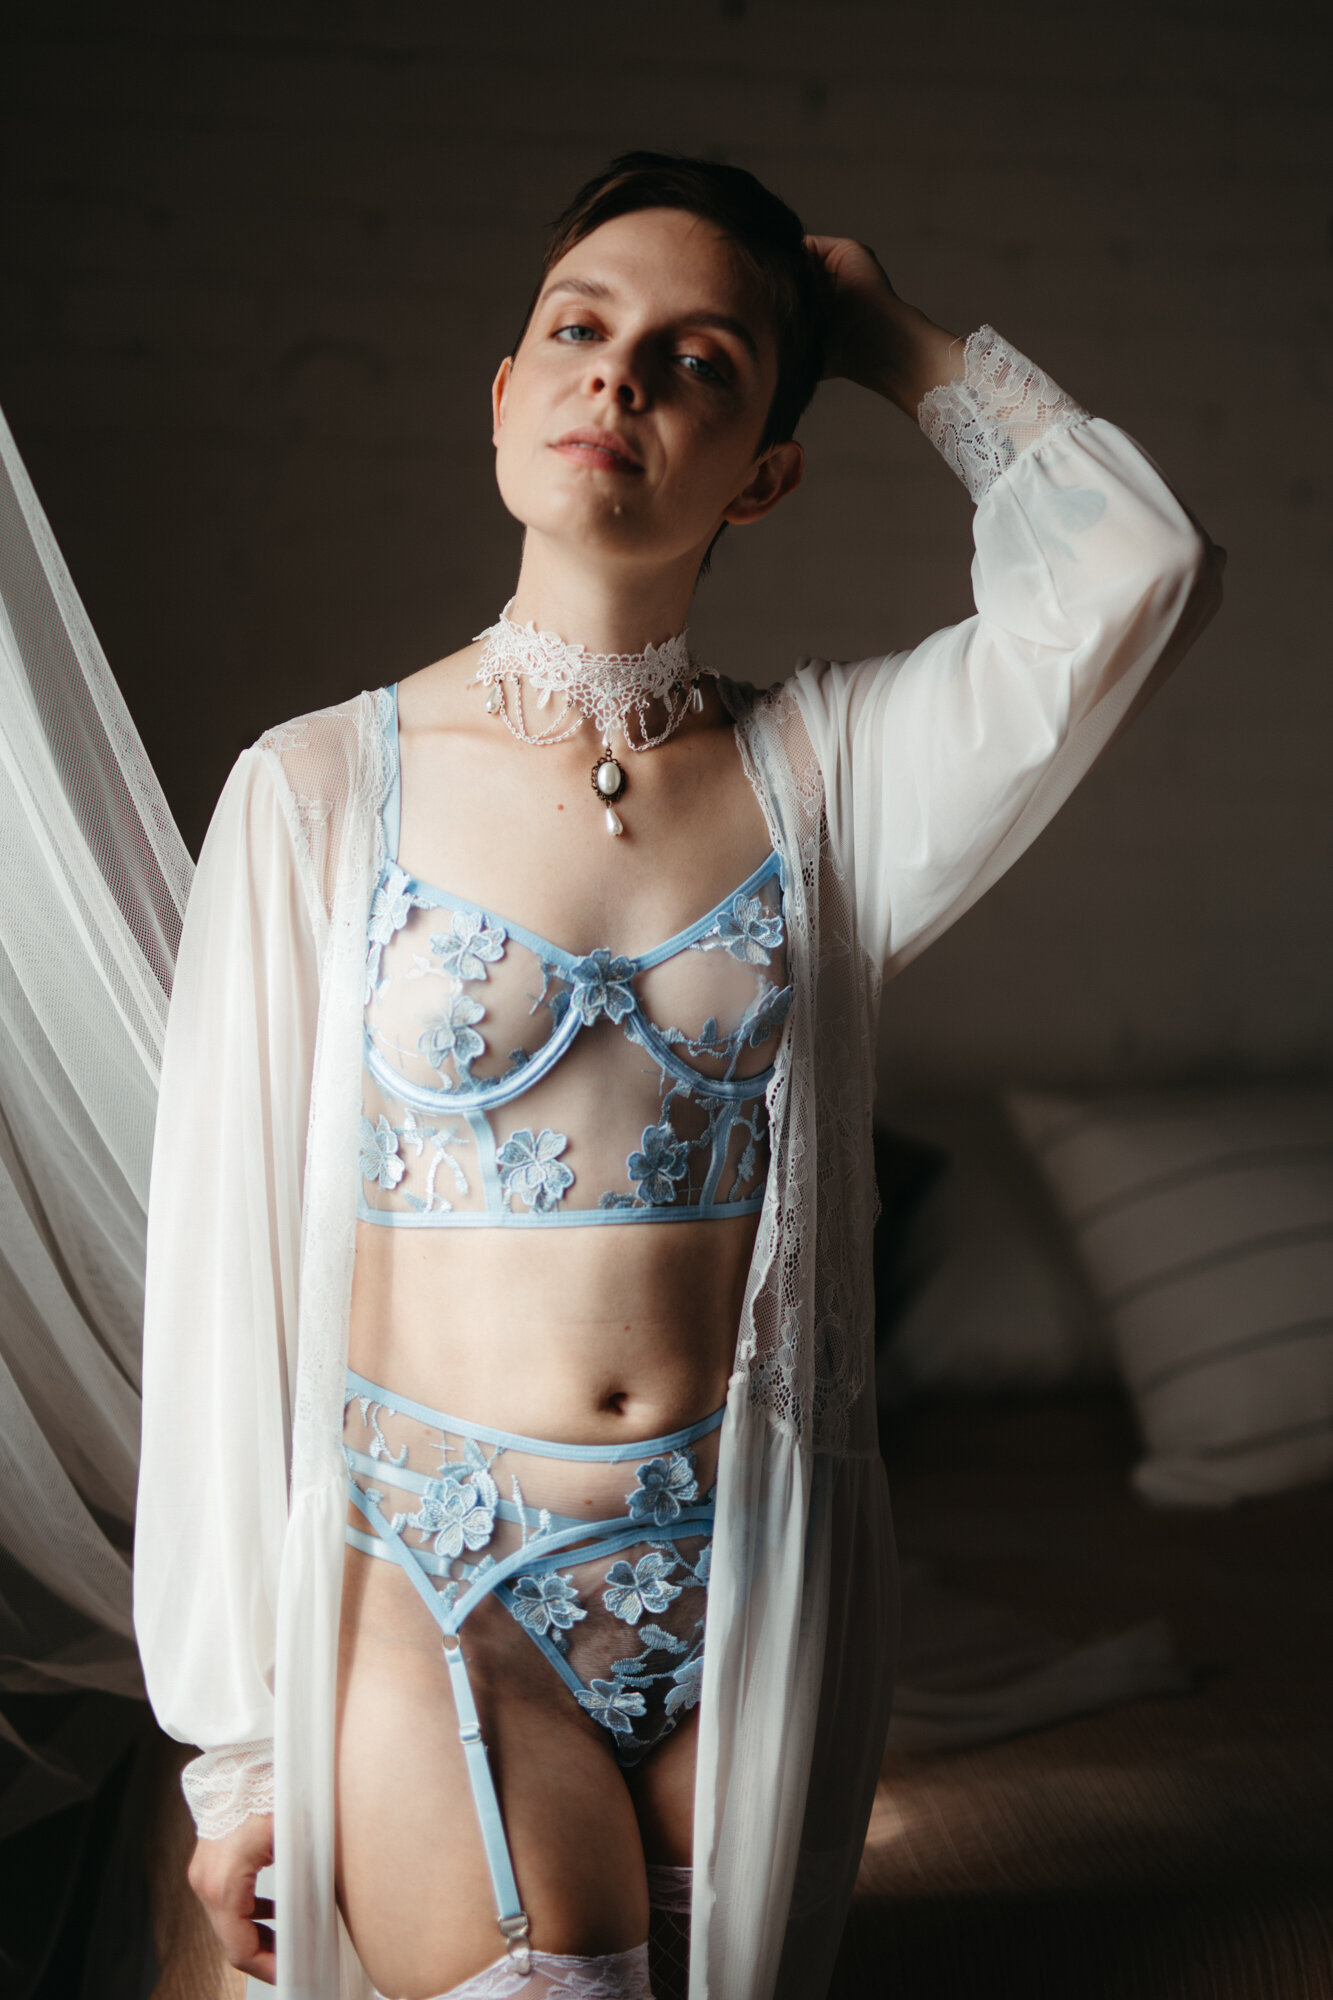 Genderqueer person wearing victorian style blue lingerie and a white robe